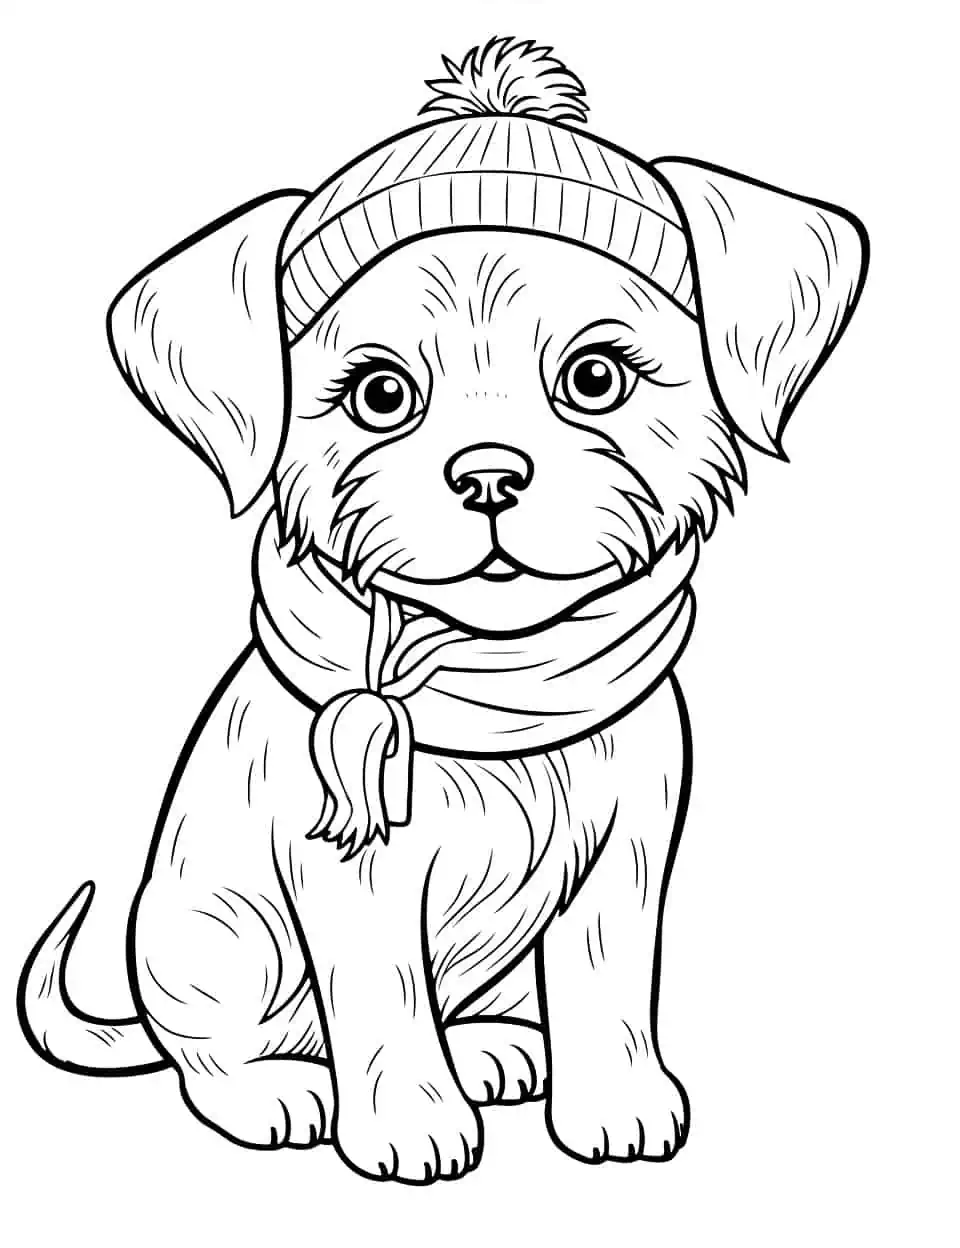 Yorkie in a Knit Hat Dog Coloring Page - A fashionable Yorkie in a colorful knit hat and scarf for a winter theme.